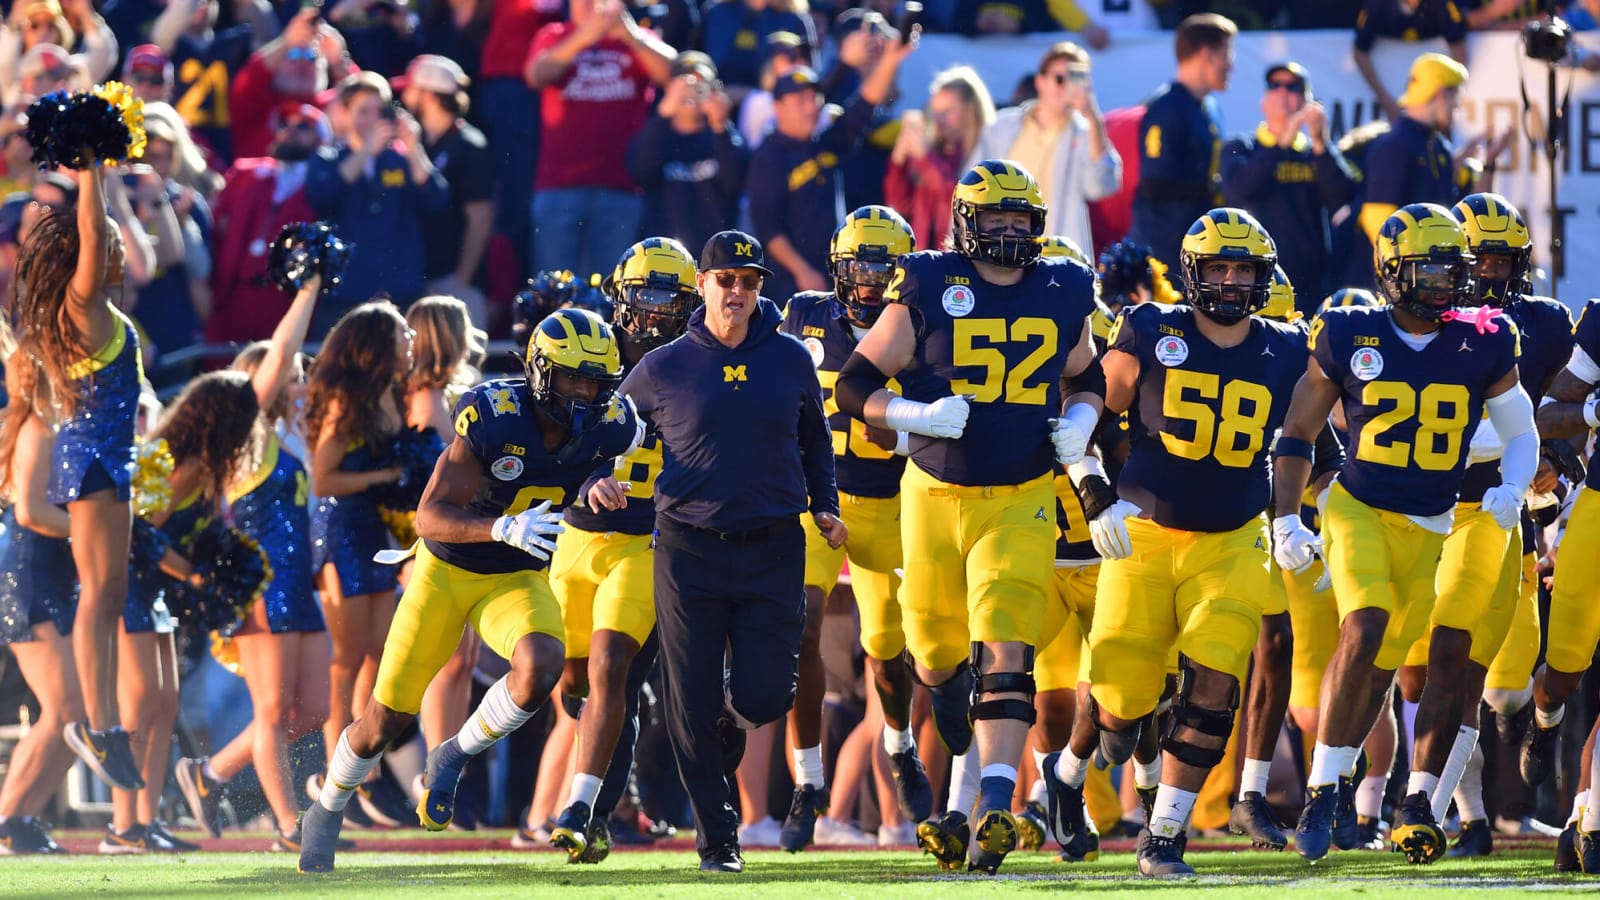 Michigan an early favorite in CFP championship game against Washington